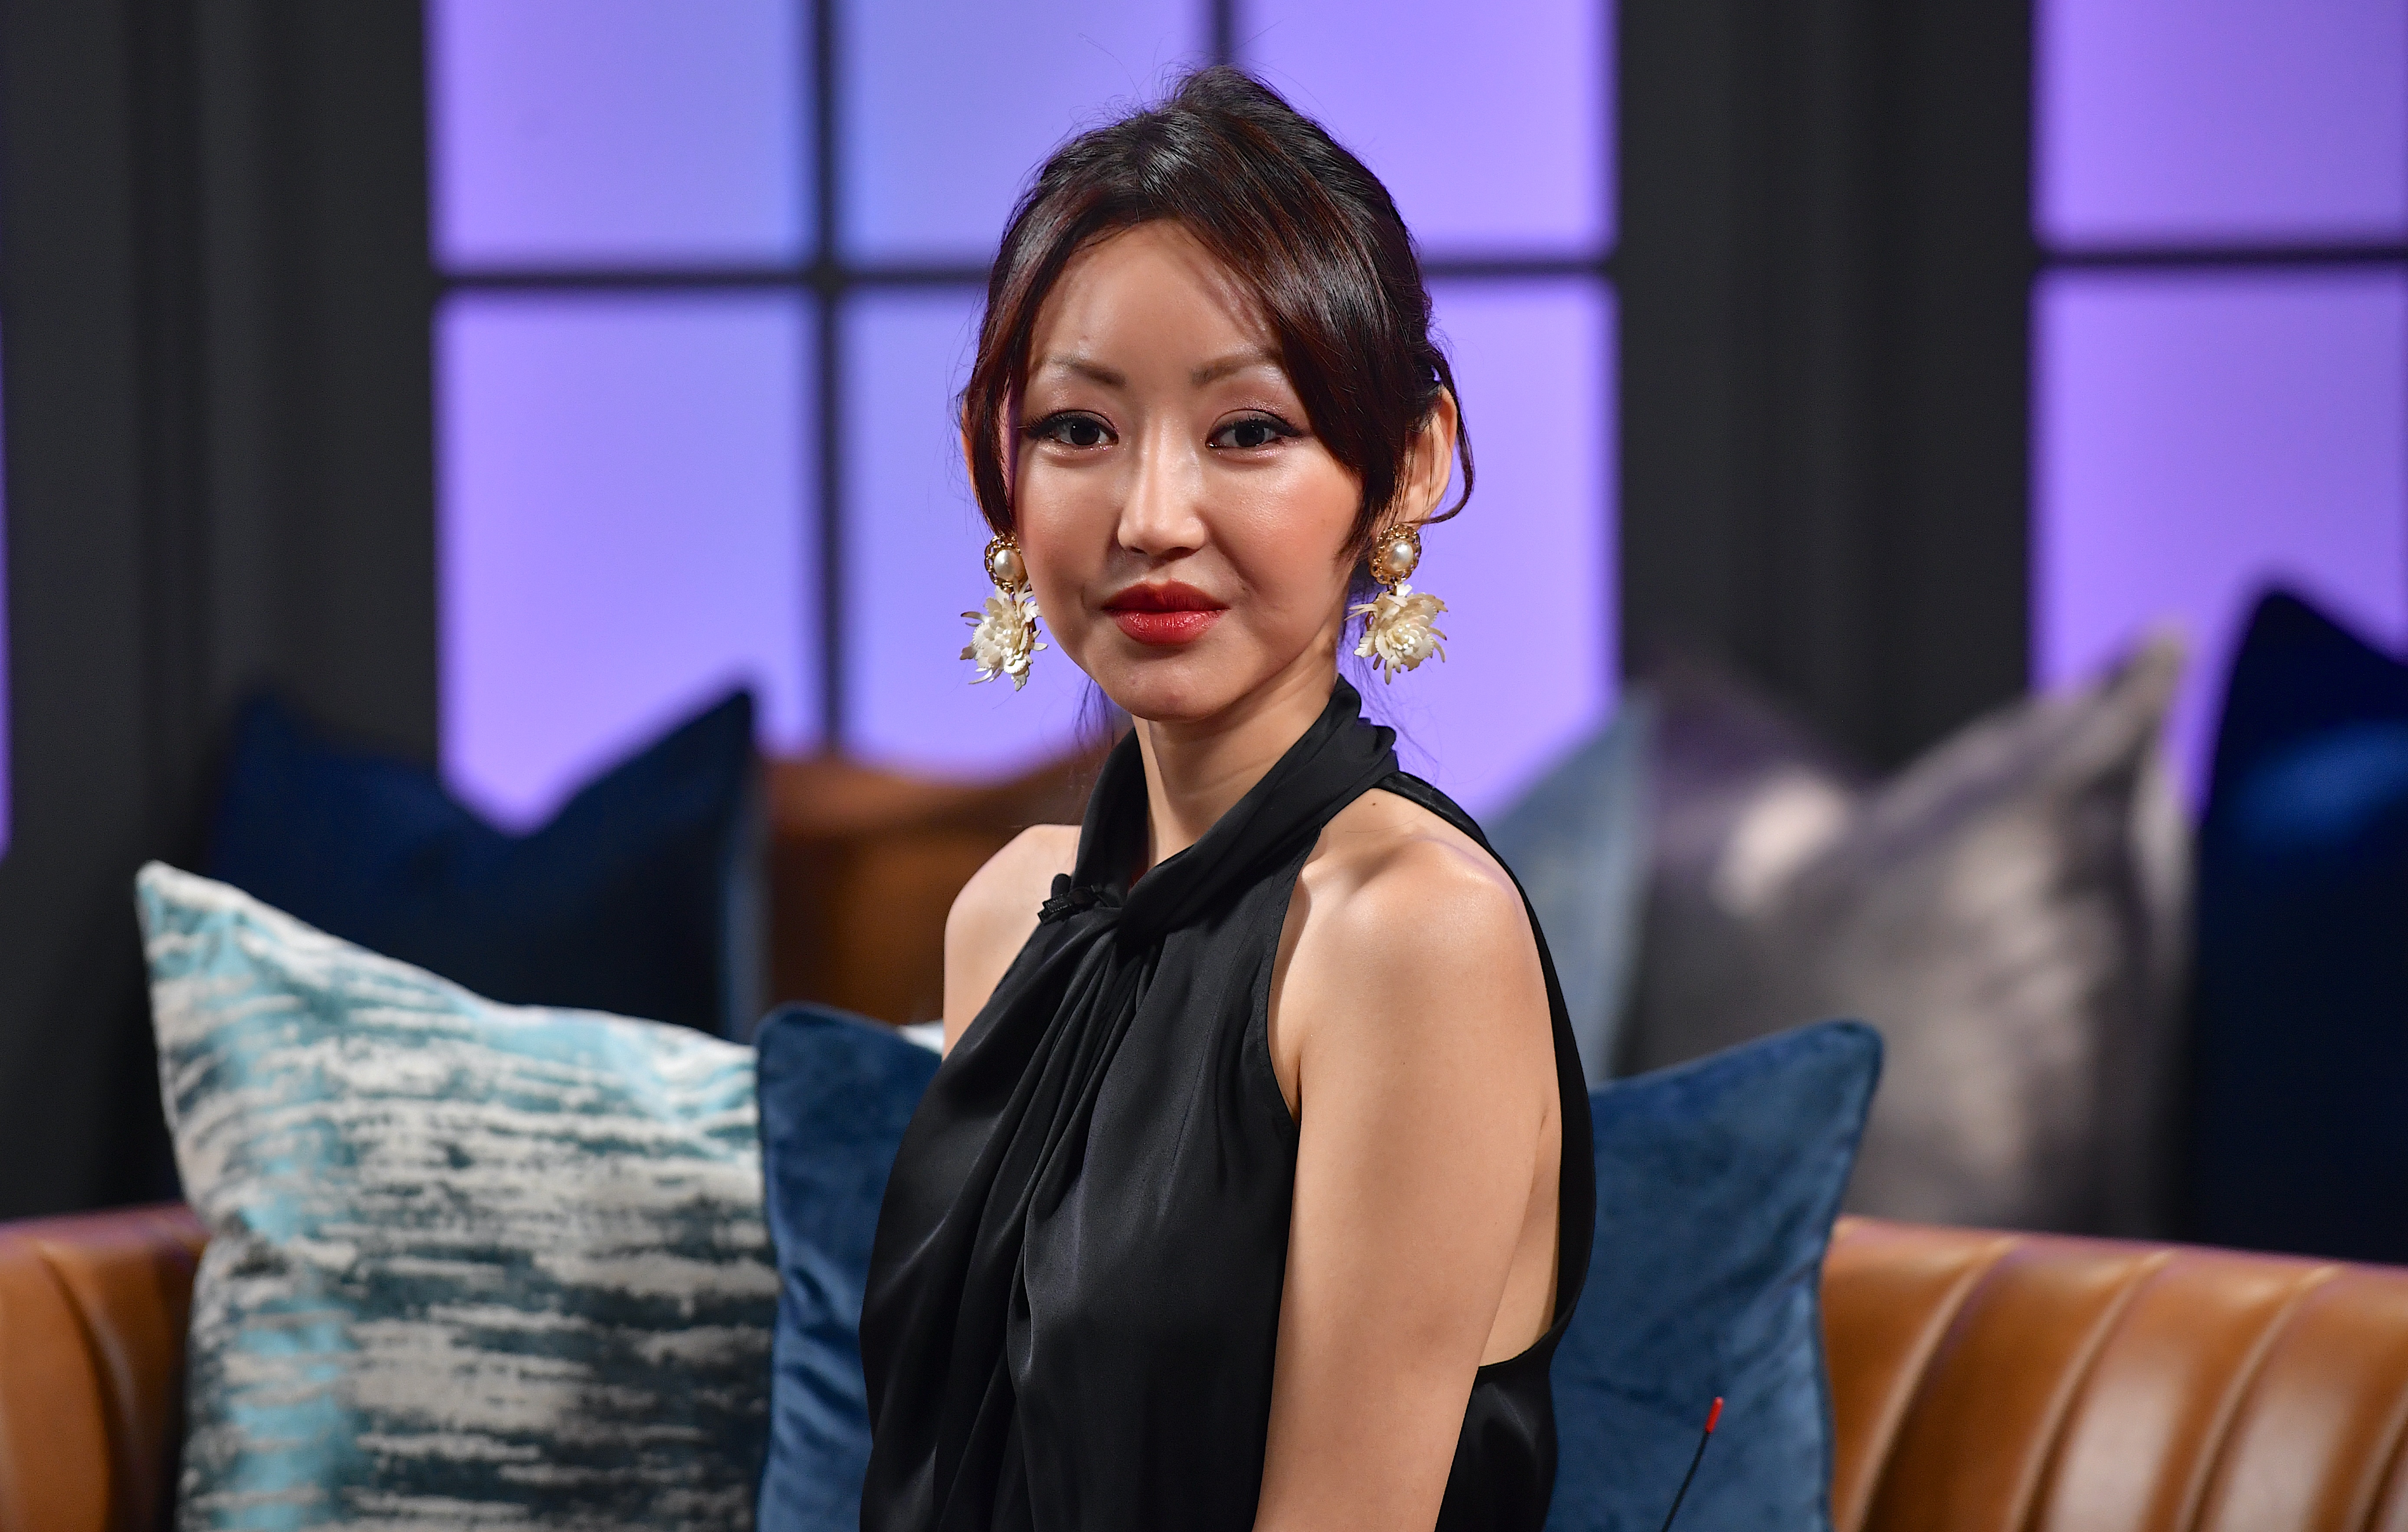 Yeonmi Park during her appearance on Candance Owens' show on November 8, 2021, in Nashville, Tennessee. | Source: Getty Images